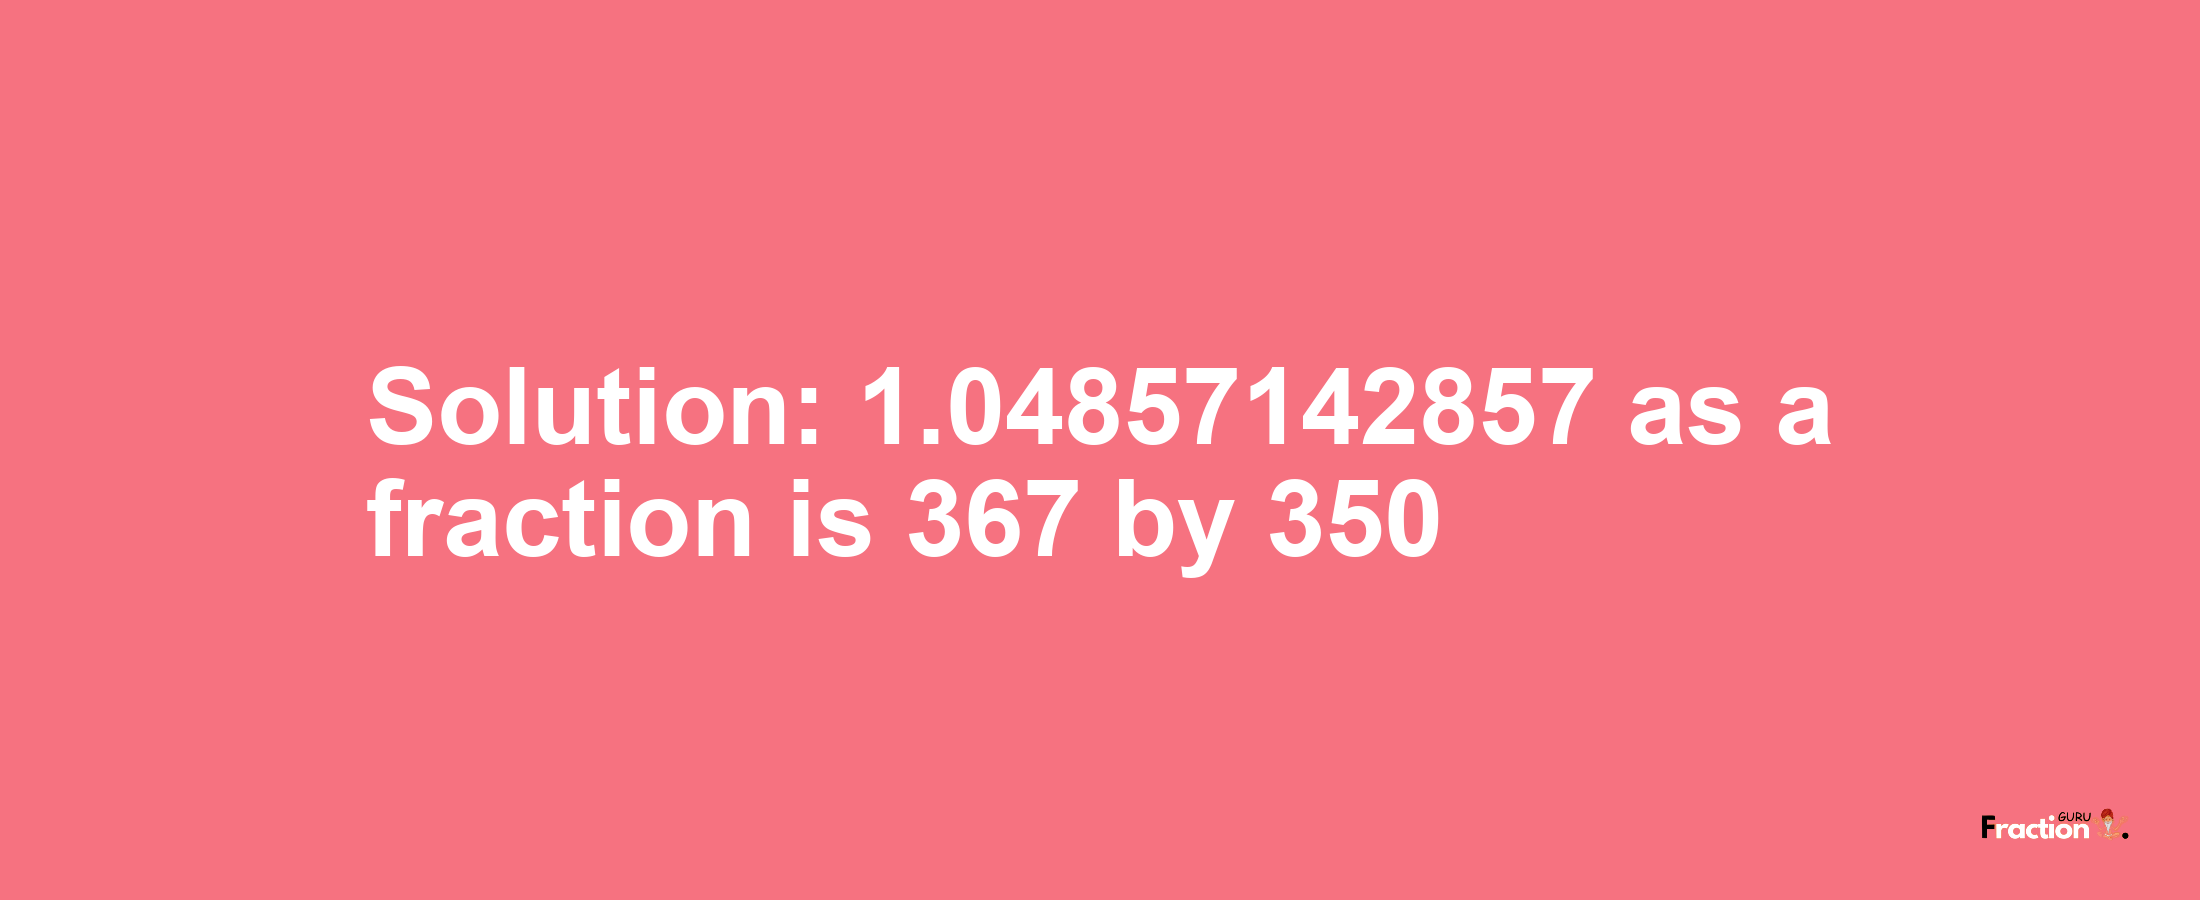 Solution:1.04857142857 as a fraction is 367/350